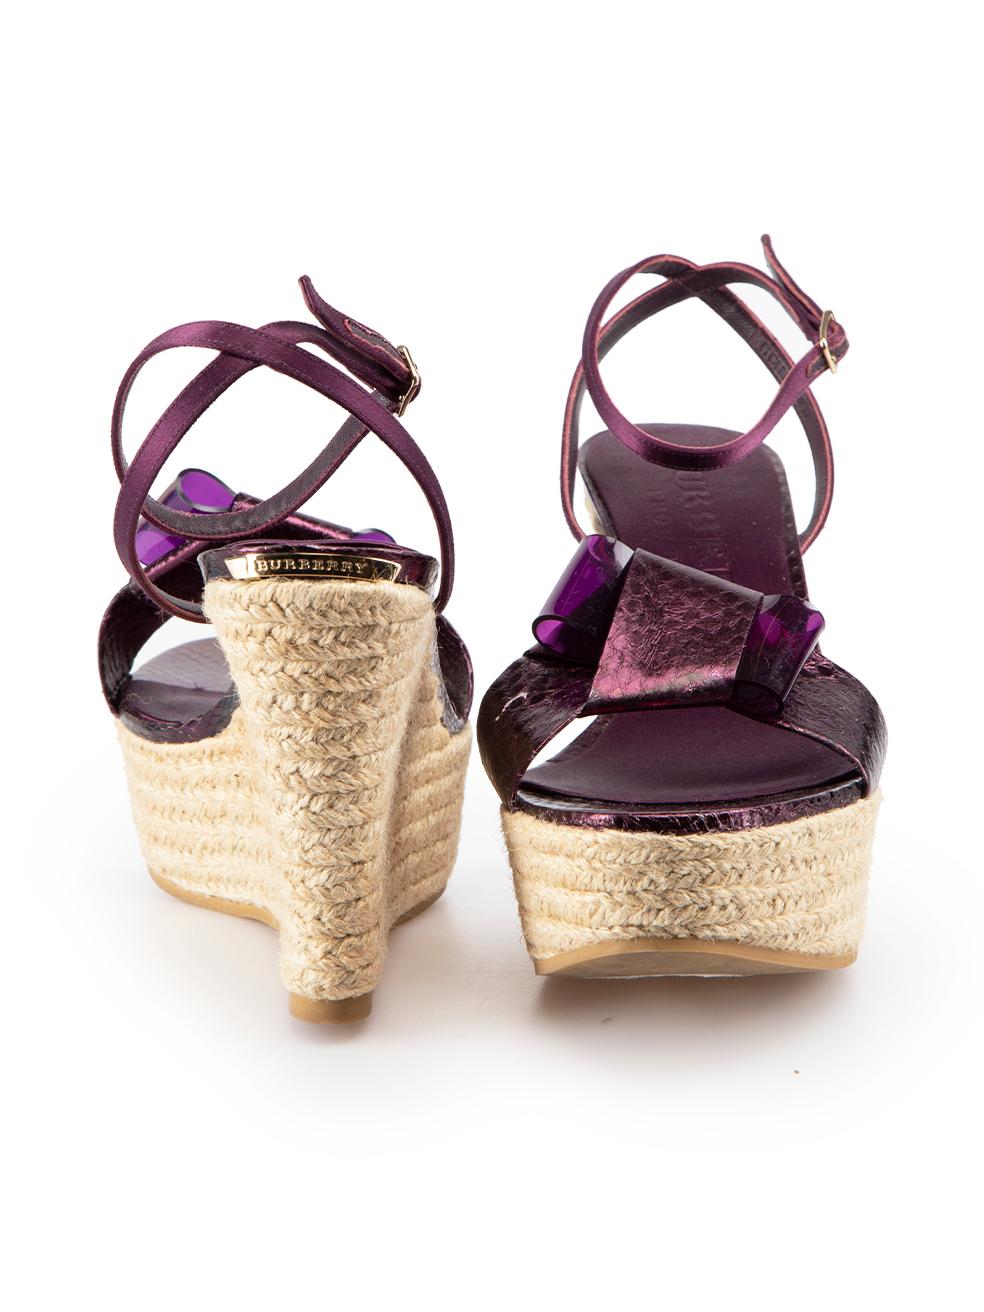 Burberry Burberry Prorsum Purple Snakeskin Moorgate Wedge Sandals Size IT 40 In Excellent Condition For Sale In London, GB